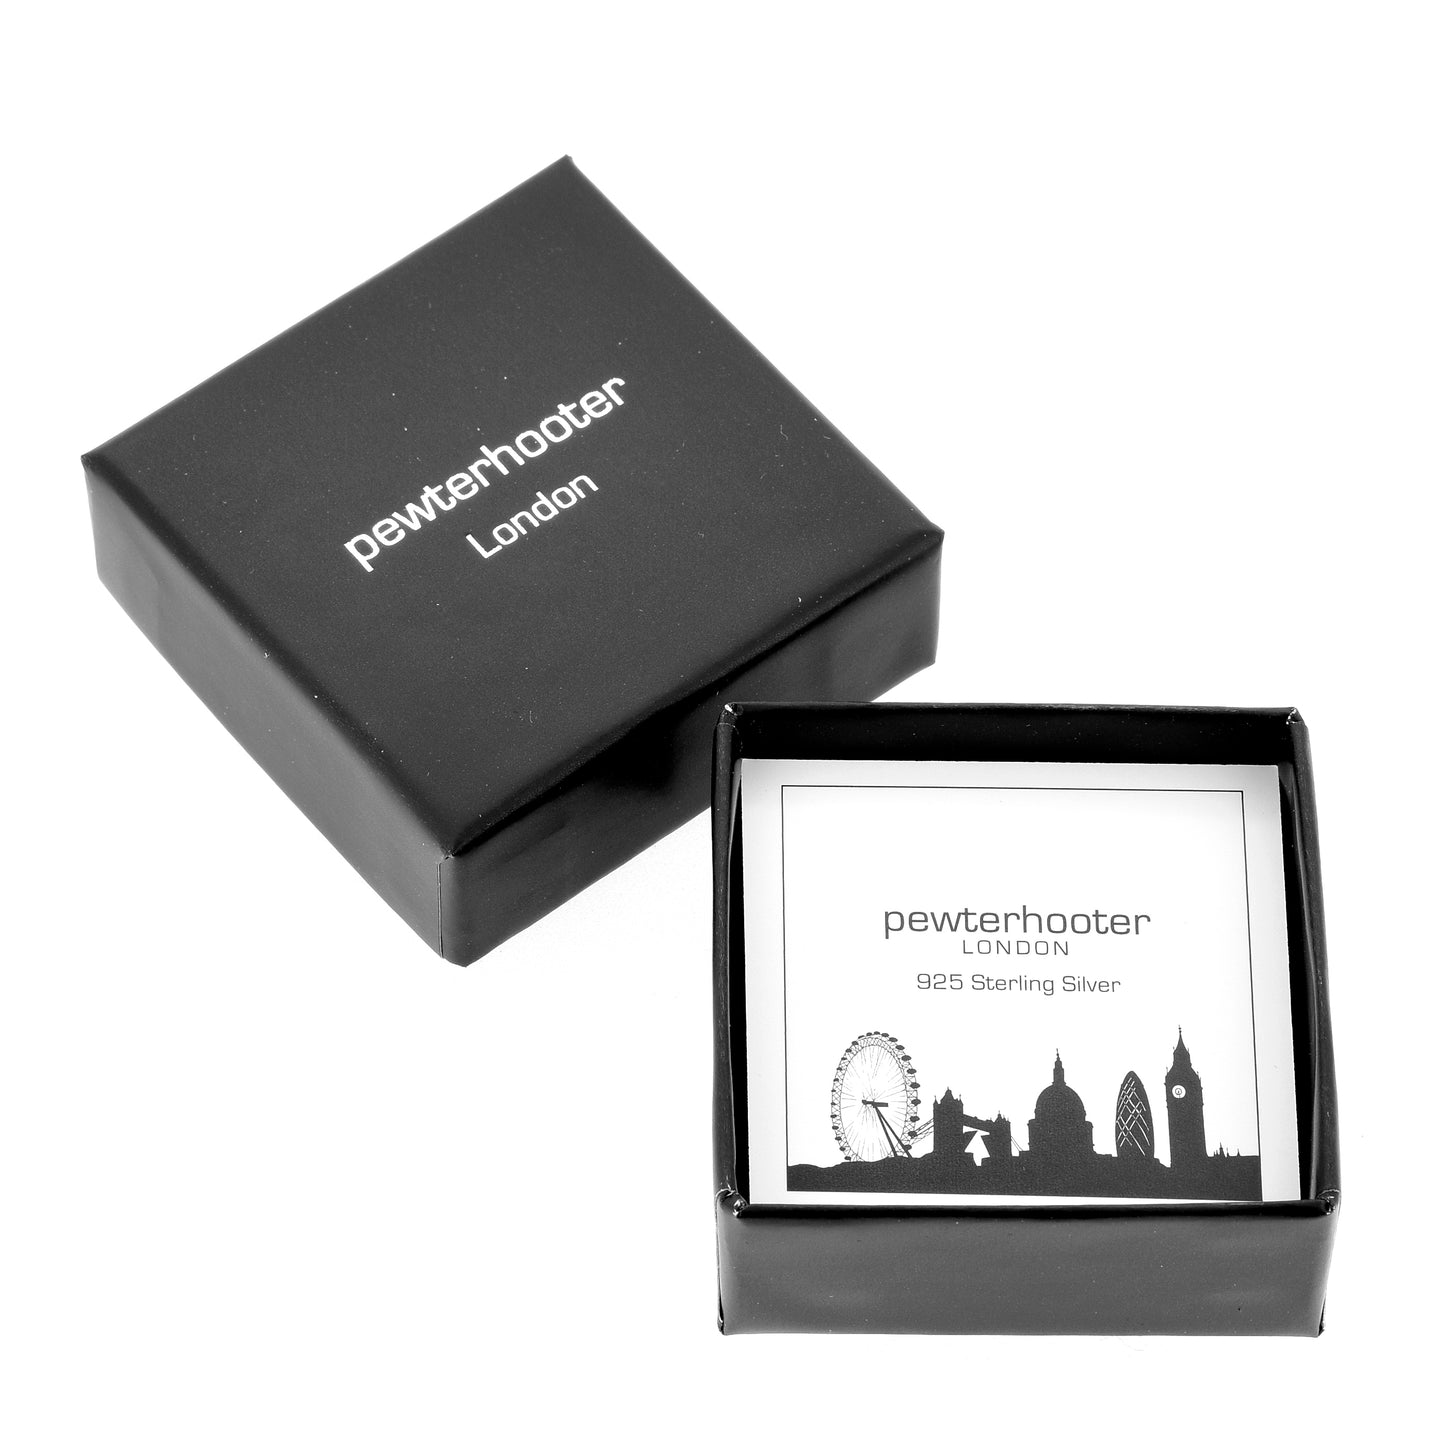 pewterhooter® Women's Classic Collection 925 Sterling silver earrings with brilliant Jet crystals, packaged in a gift box for any occasion.